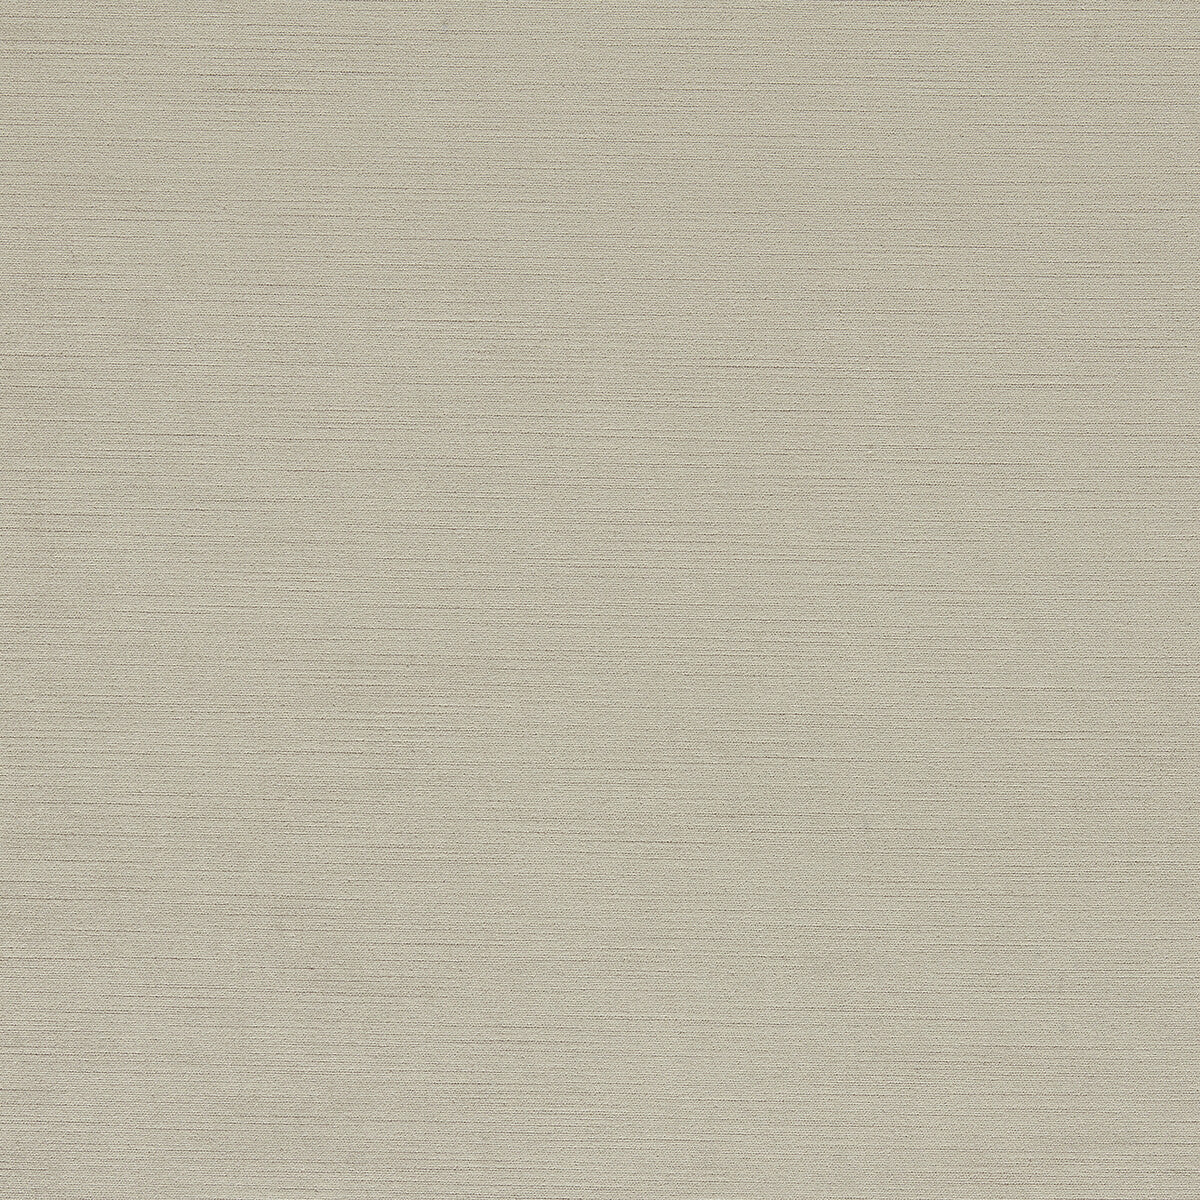 Riva fabric in vanilla color - pattern F1583/25.CAC.0 - by Clarke And Clarke in the Clarke &amp; Clarke Riva collection